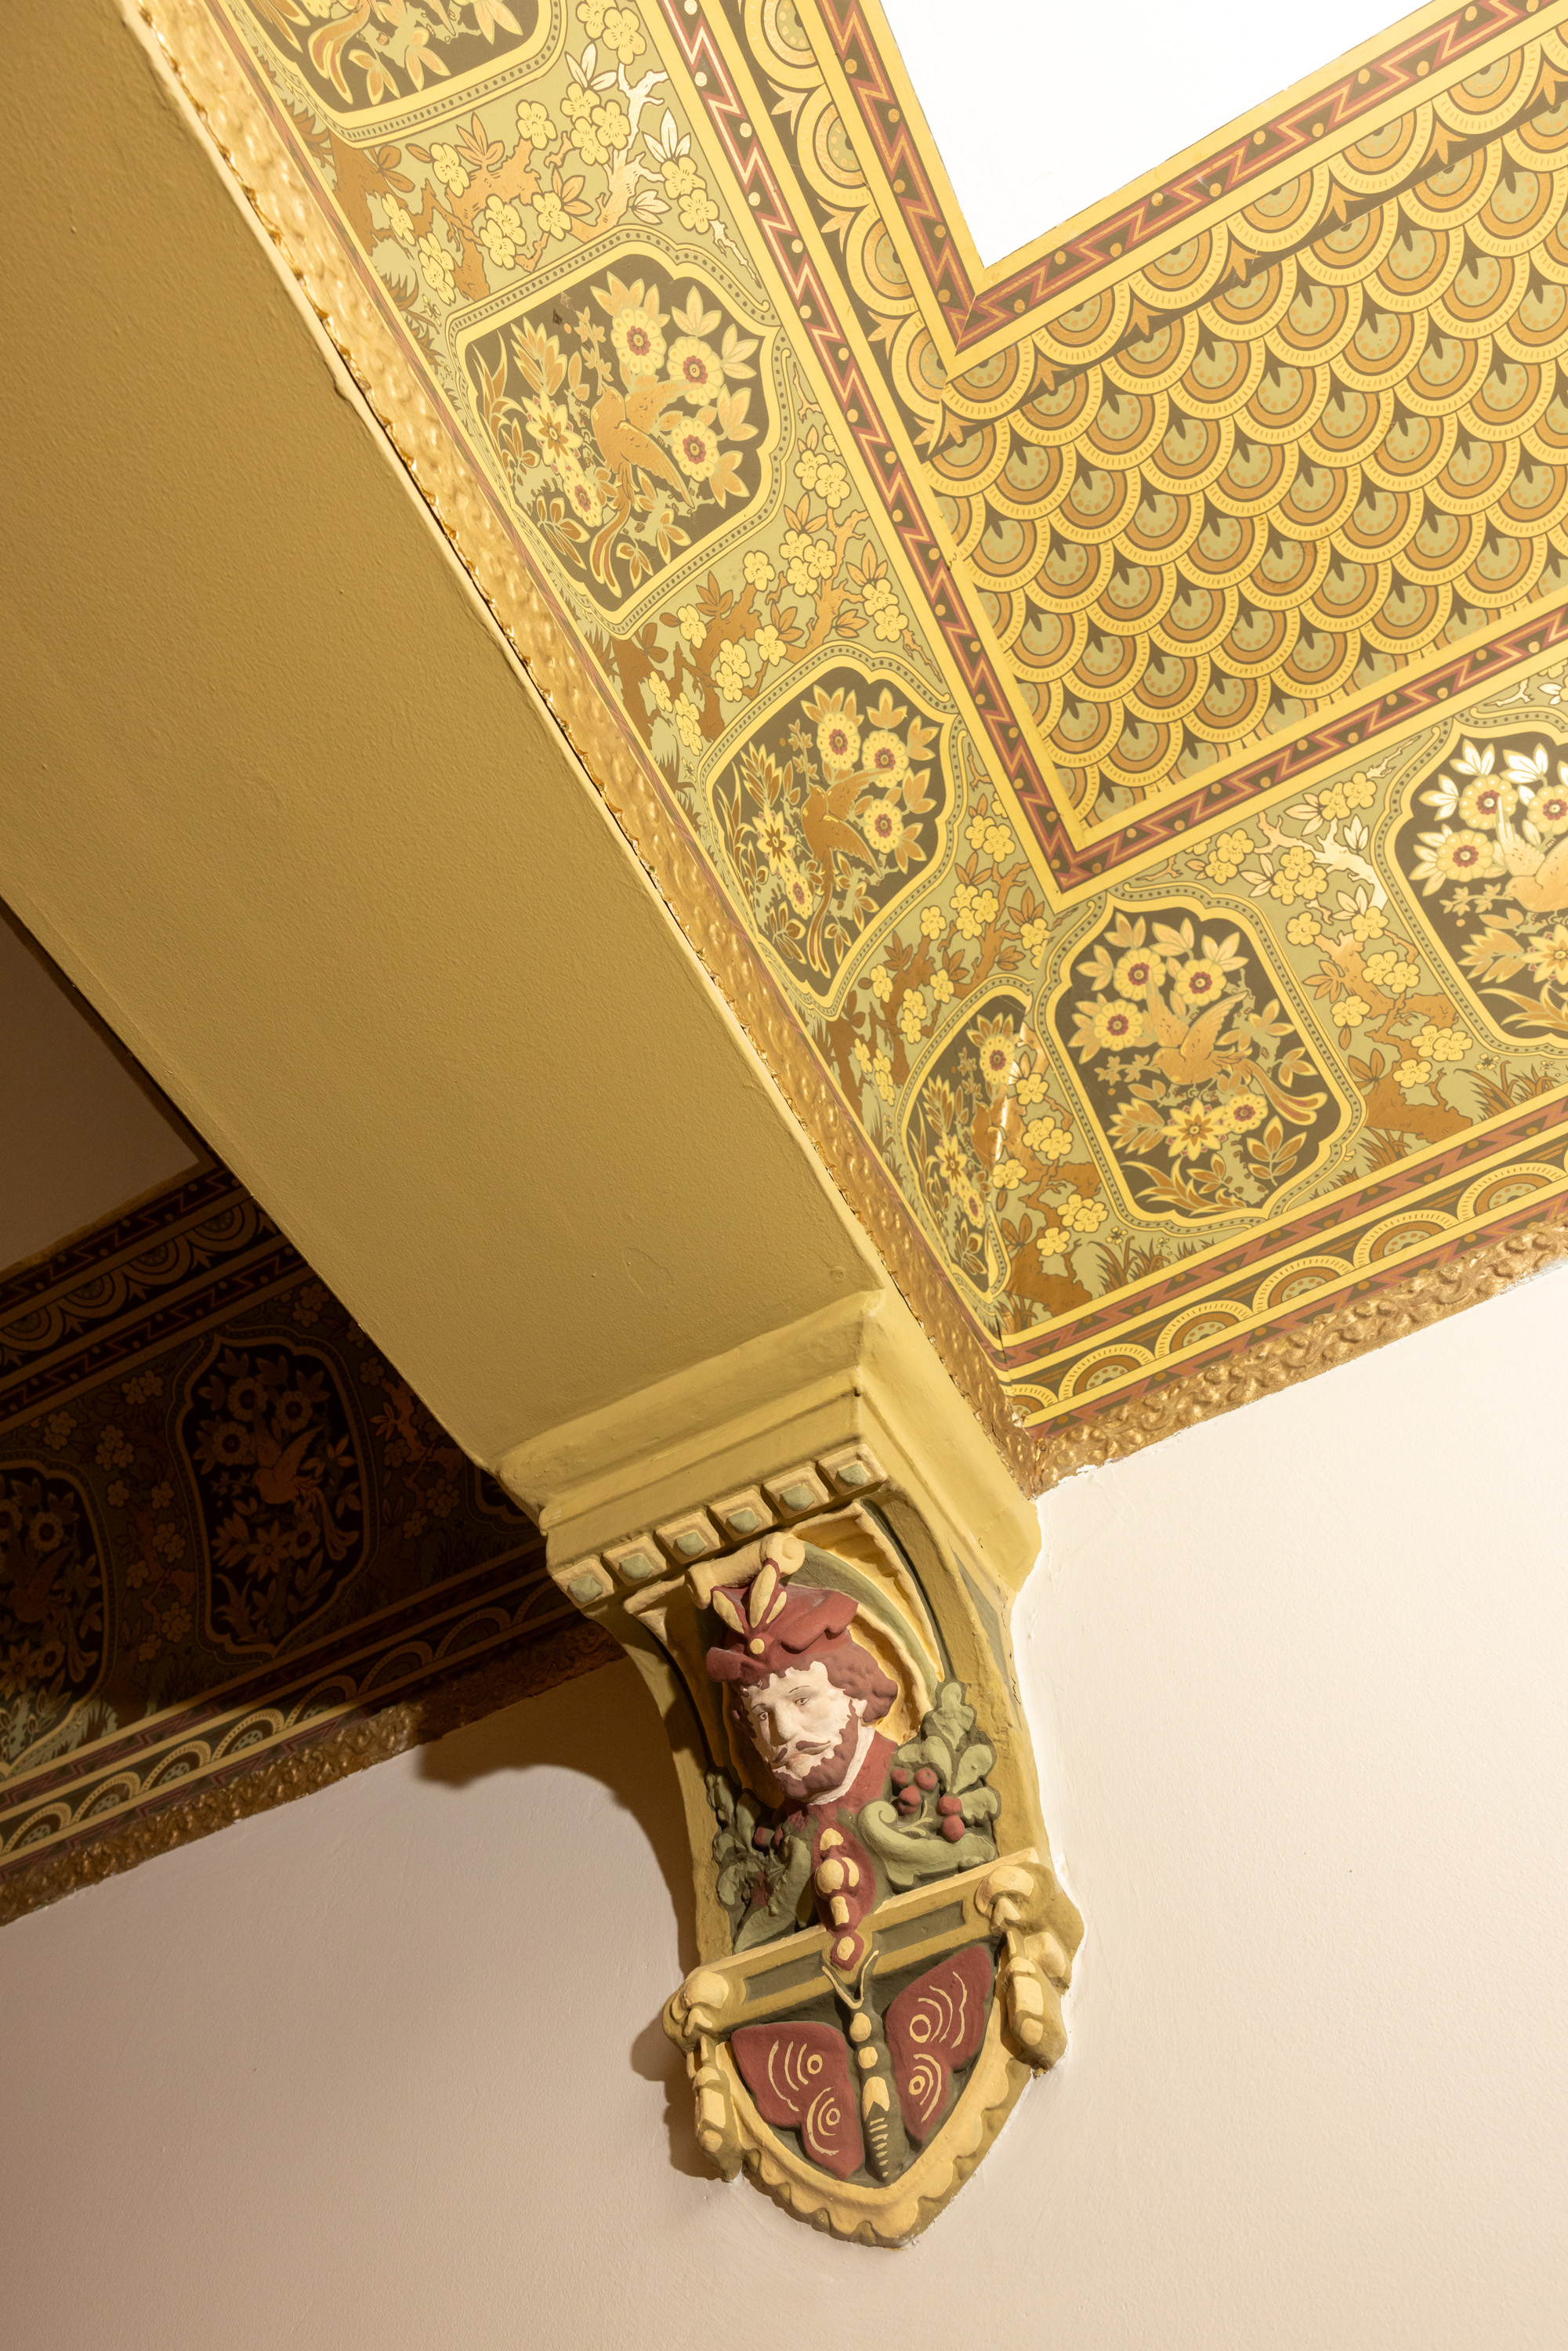 The image shows an ornate corner of a ceiling with intricate floral designs and a relief sculpture of a bearded man wearing a hat. The color palette is warm with gold and green tones.